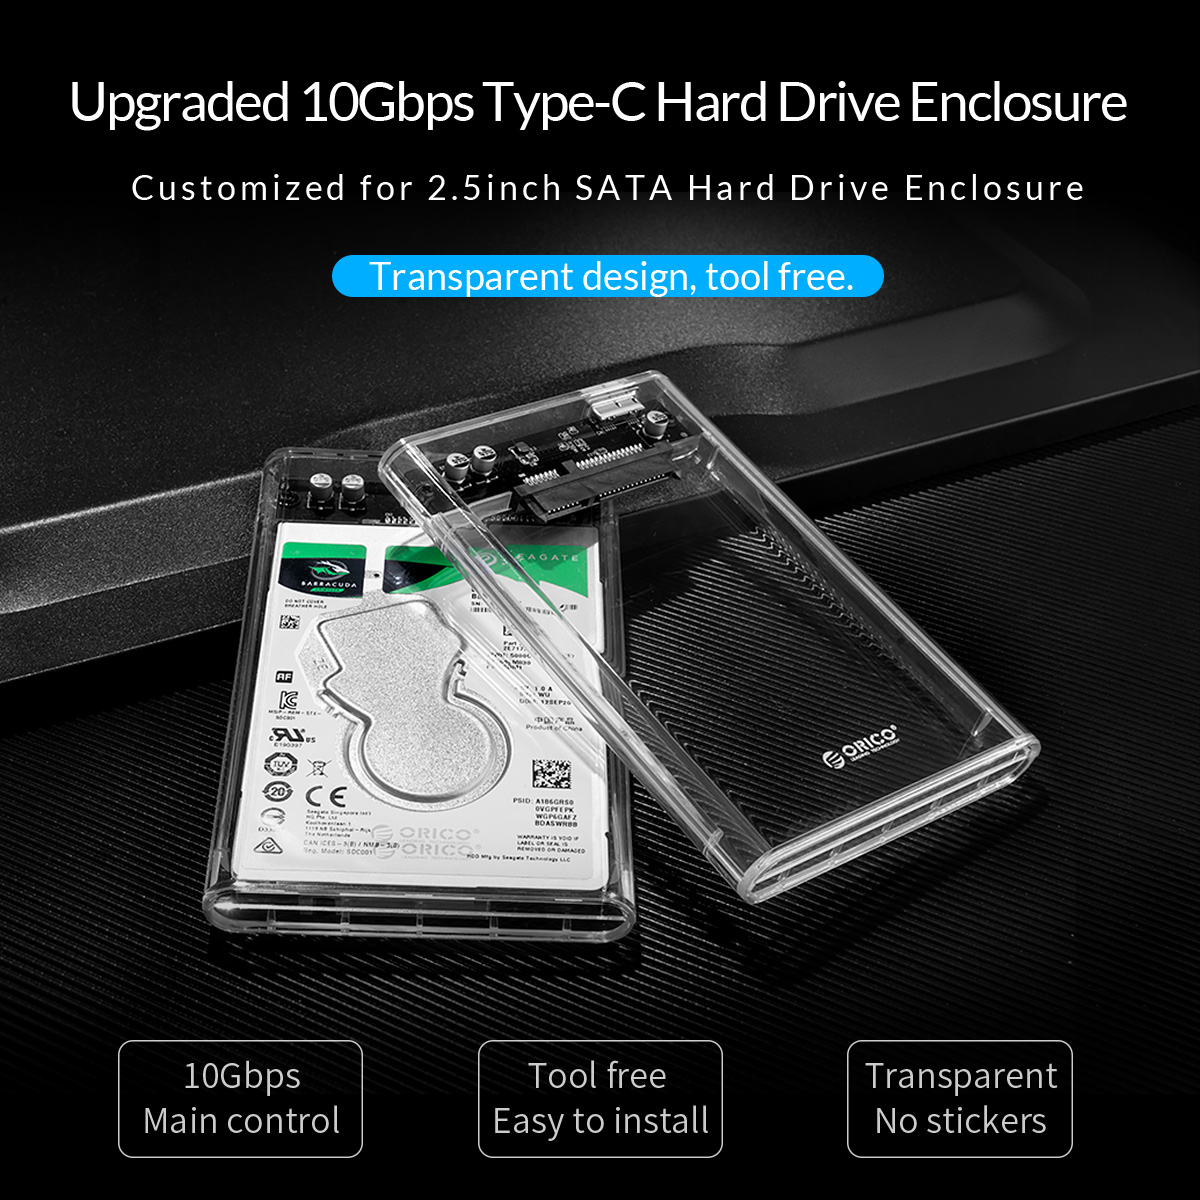 New upgrade 10Gbps Type-C hard drive enclosure